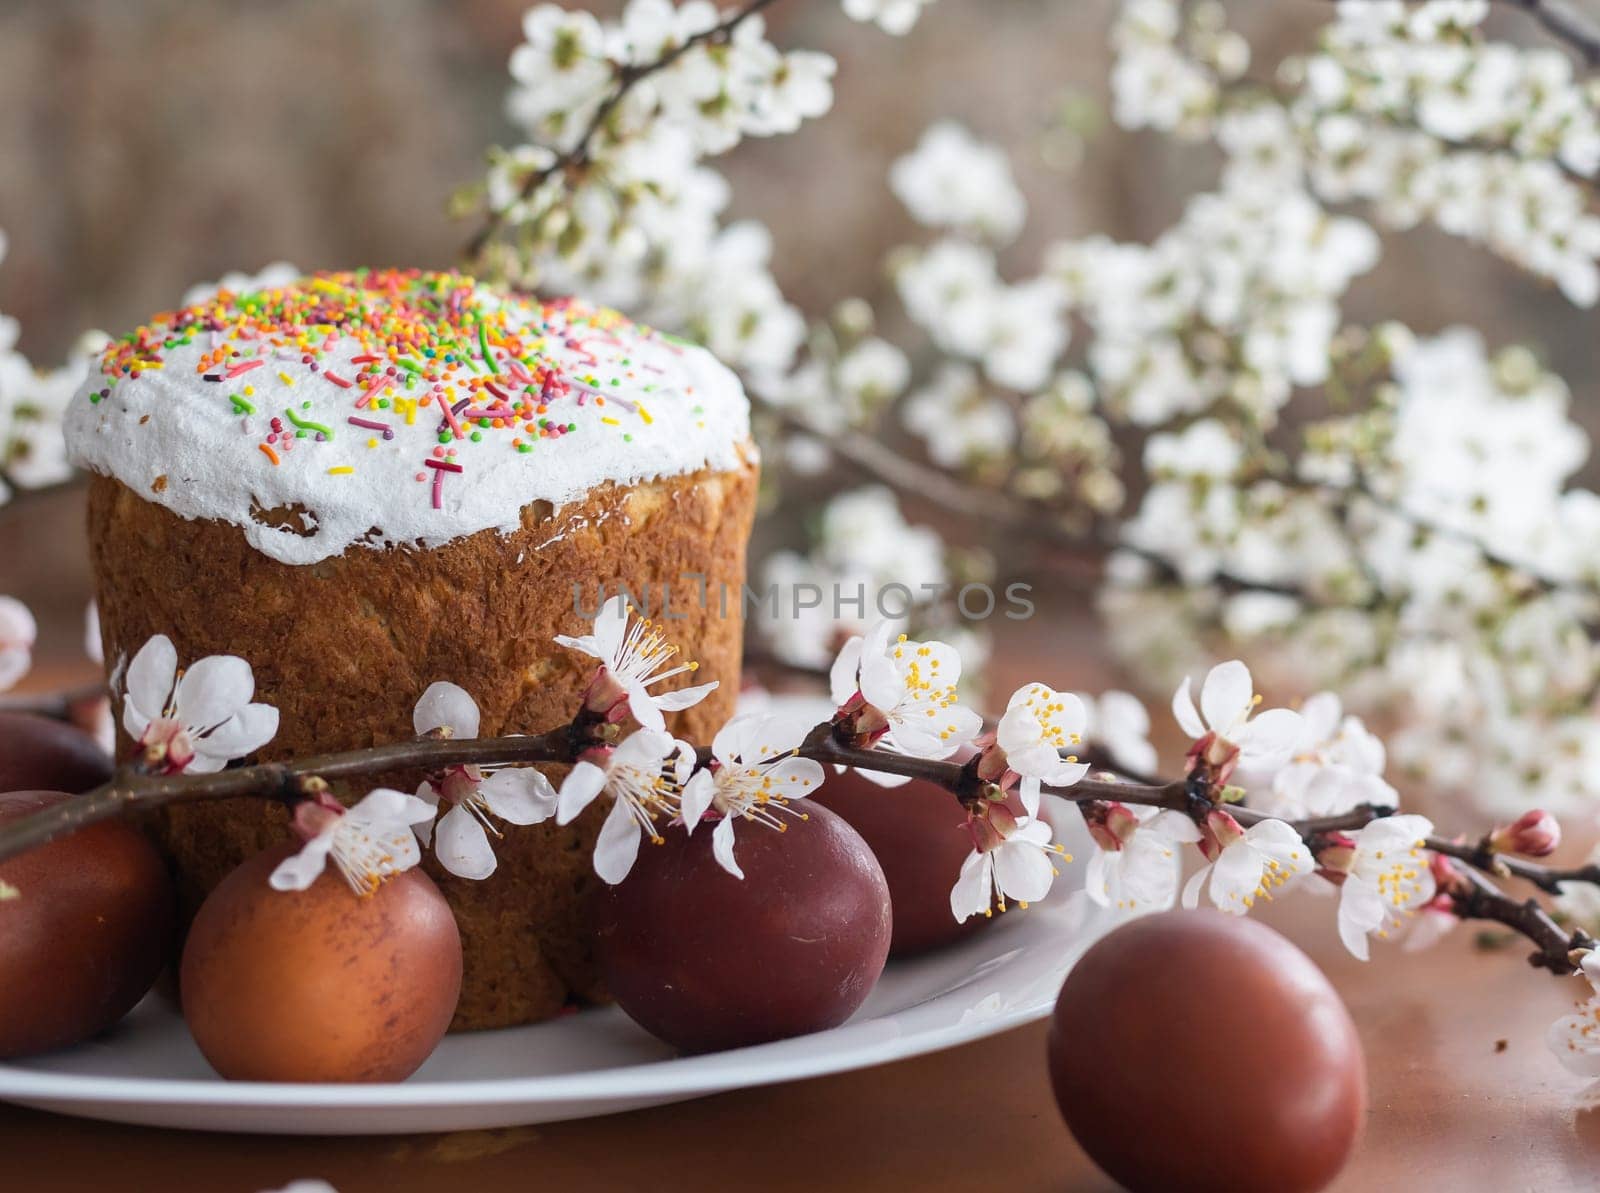 Easter cake and painted eggs by Andelov13